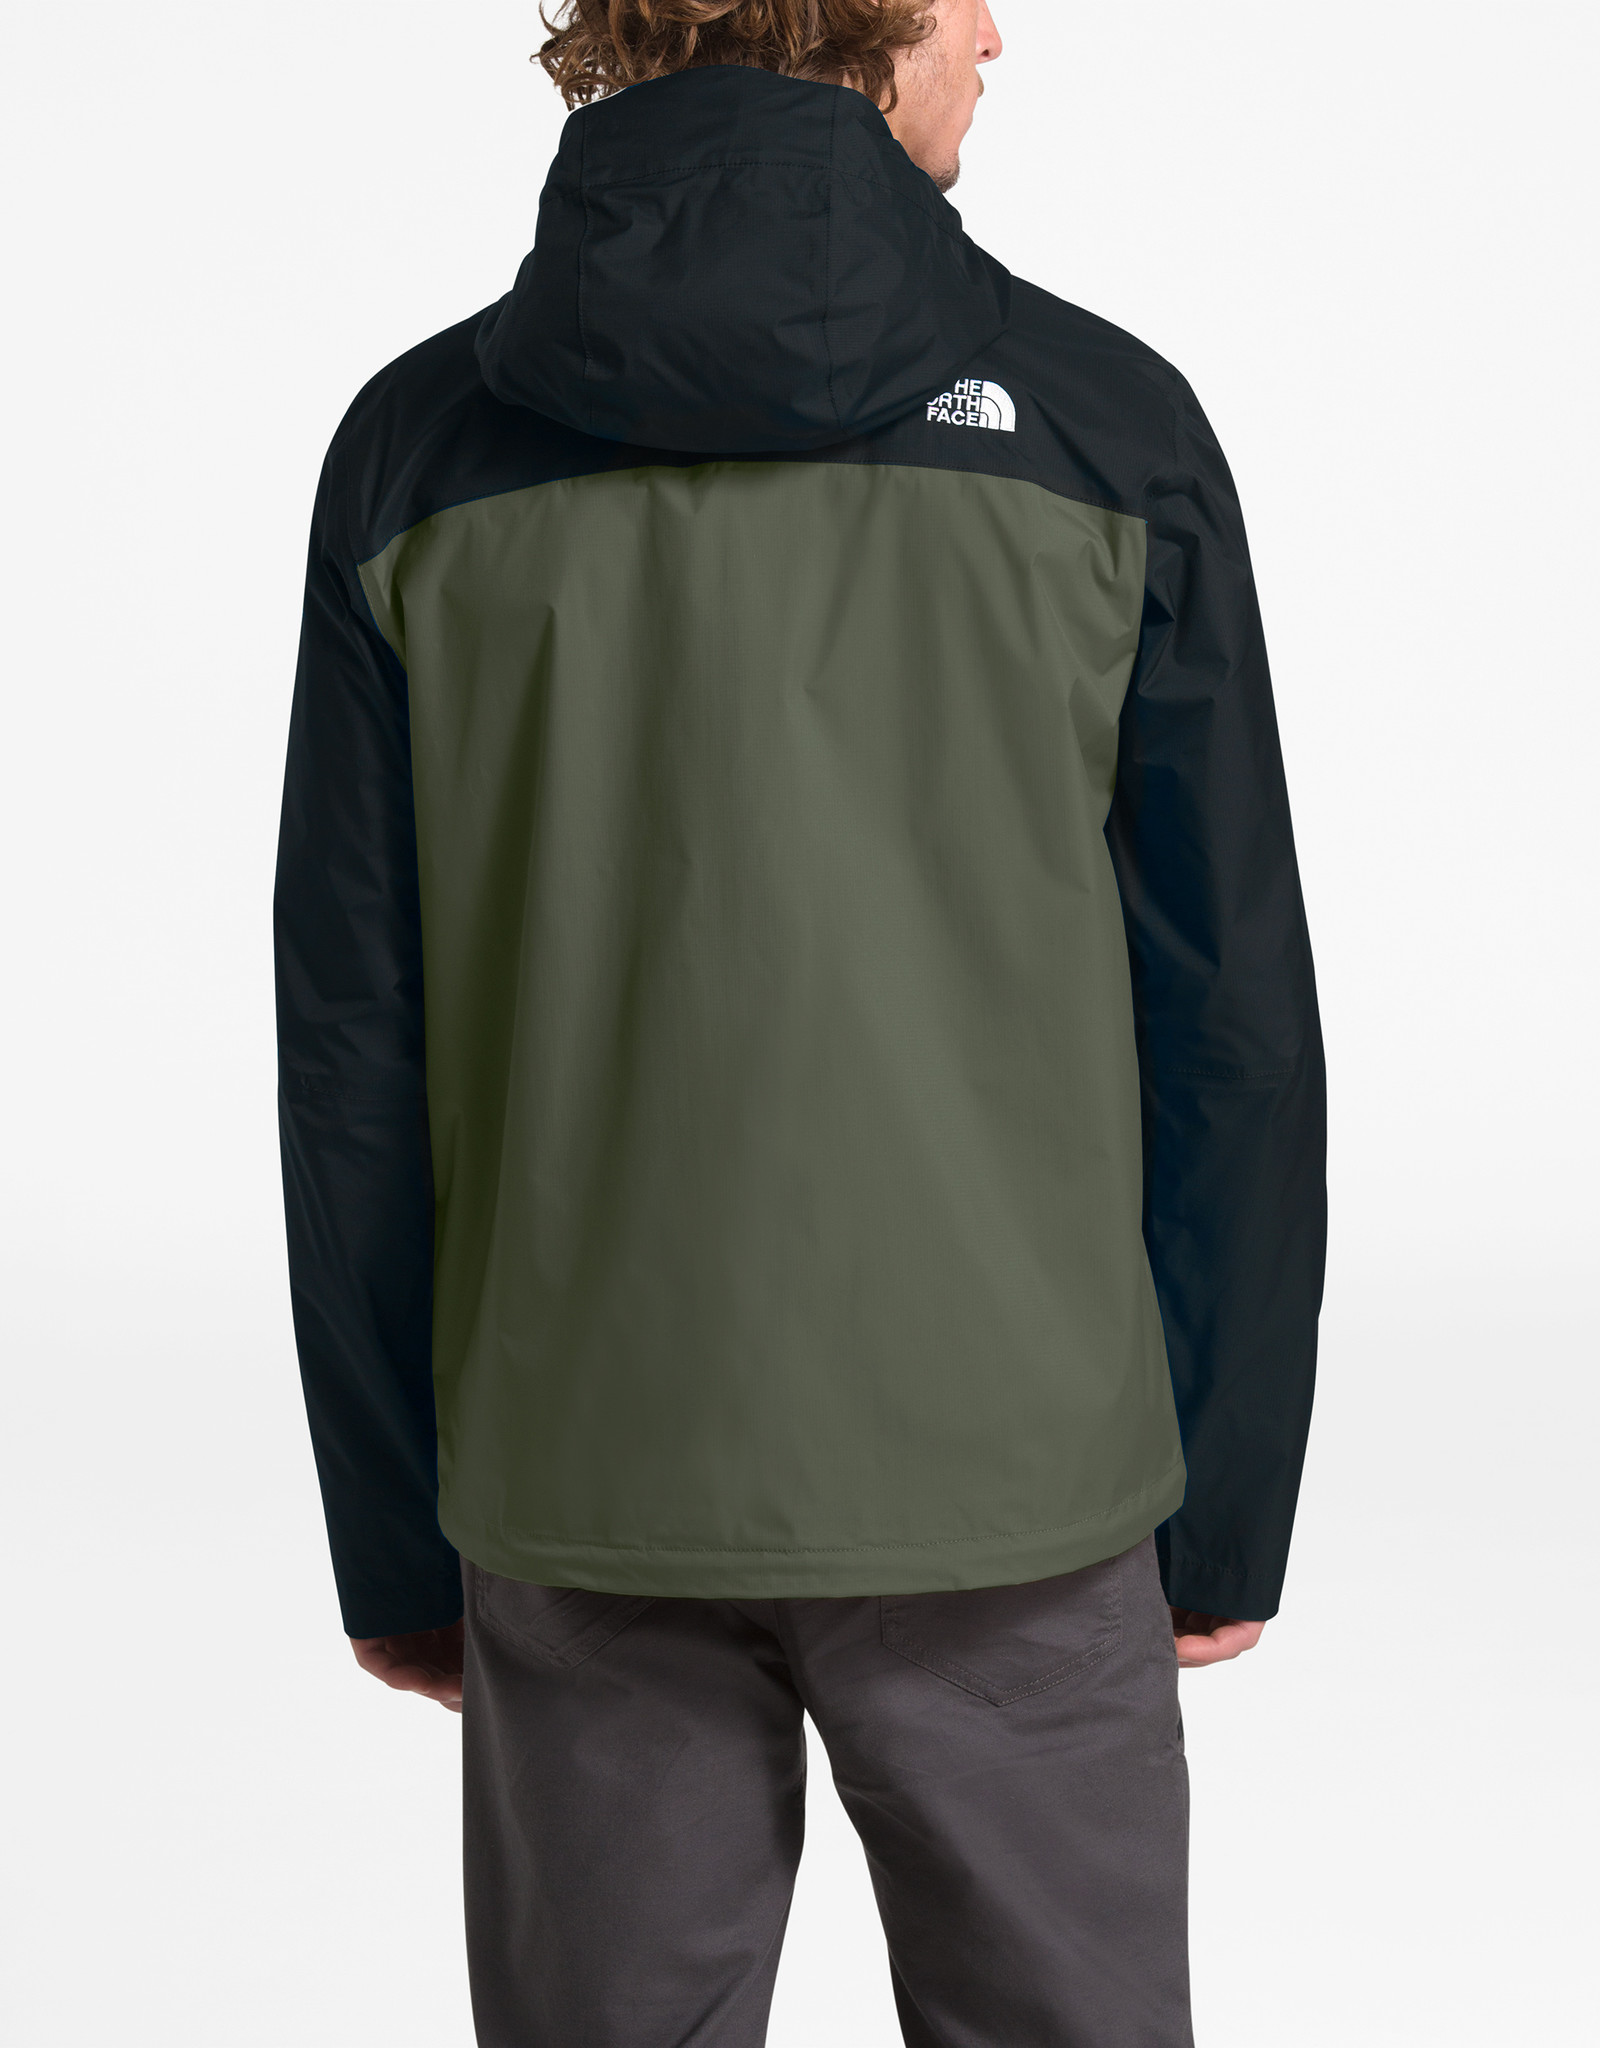 The North Face The North Face Men’s Venture 2 Jacket - F2019